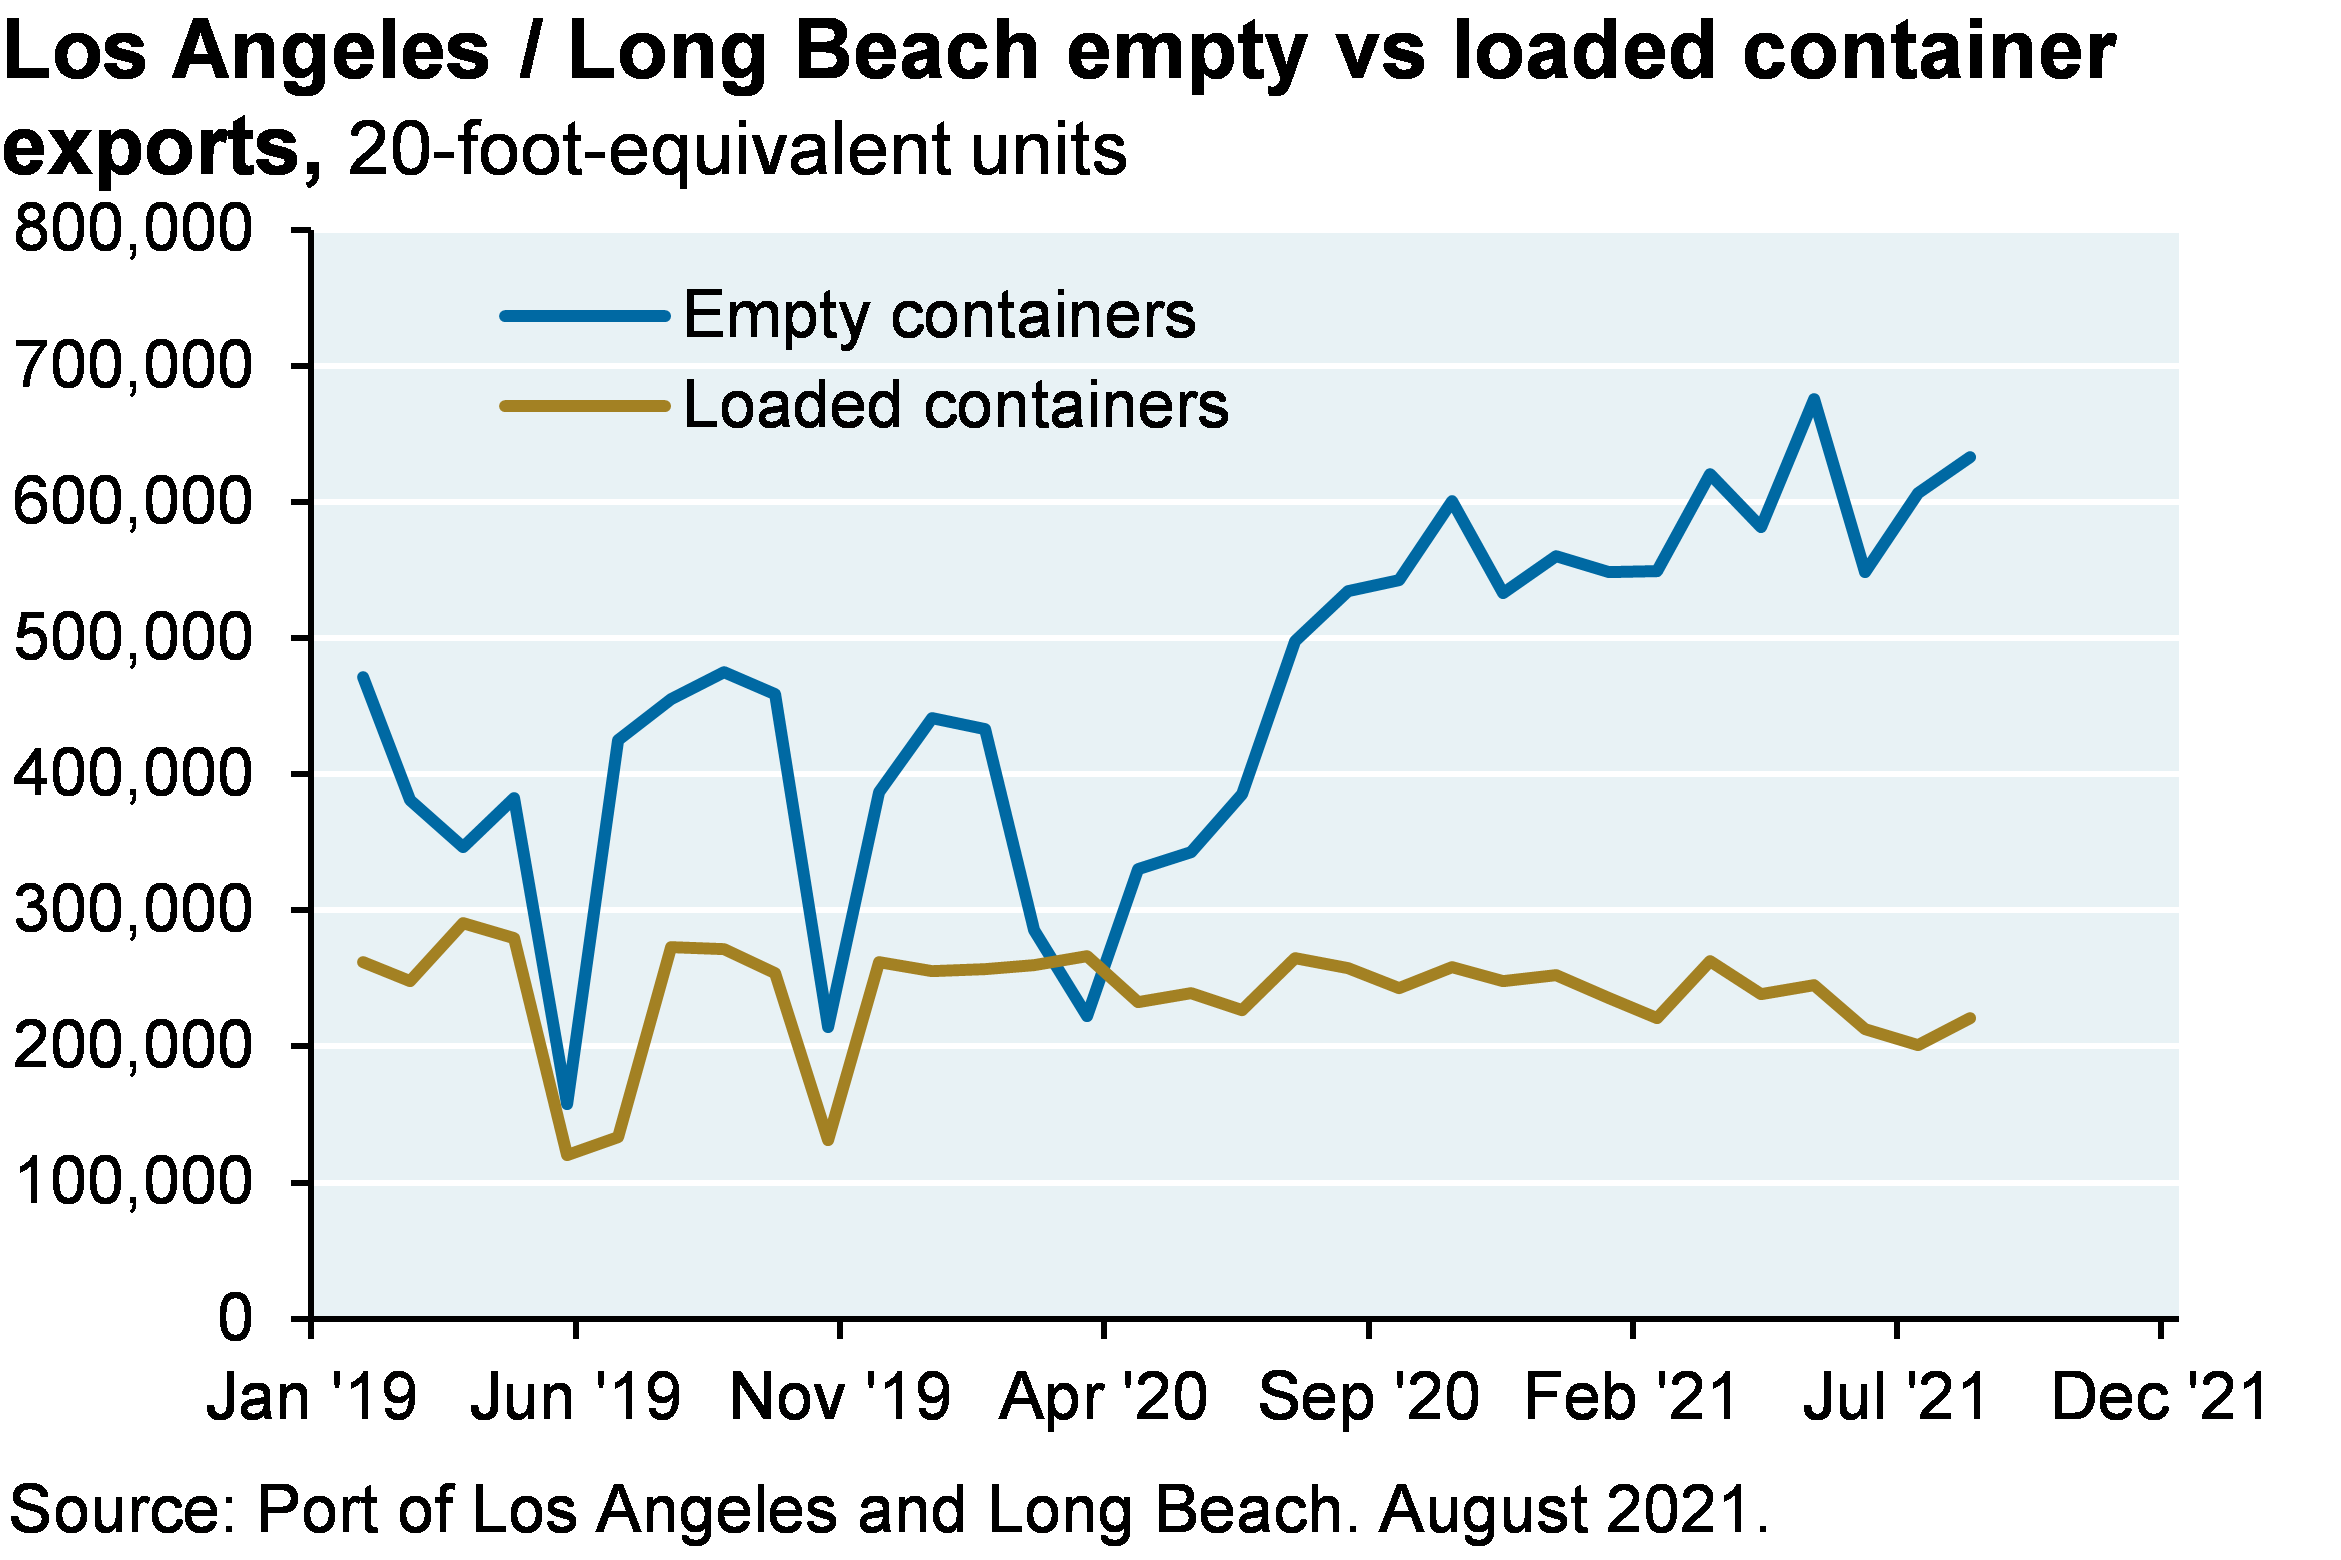 Los Angeles / Long Beach empty vs loaded container exports